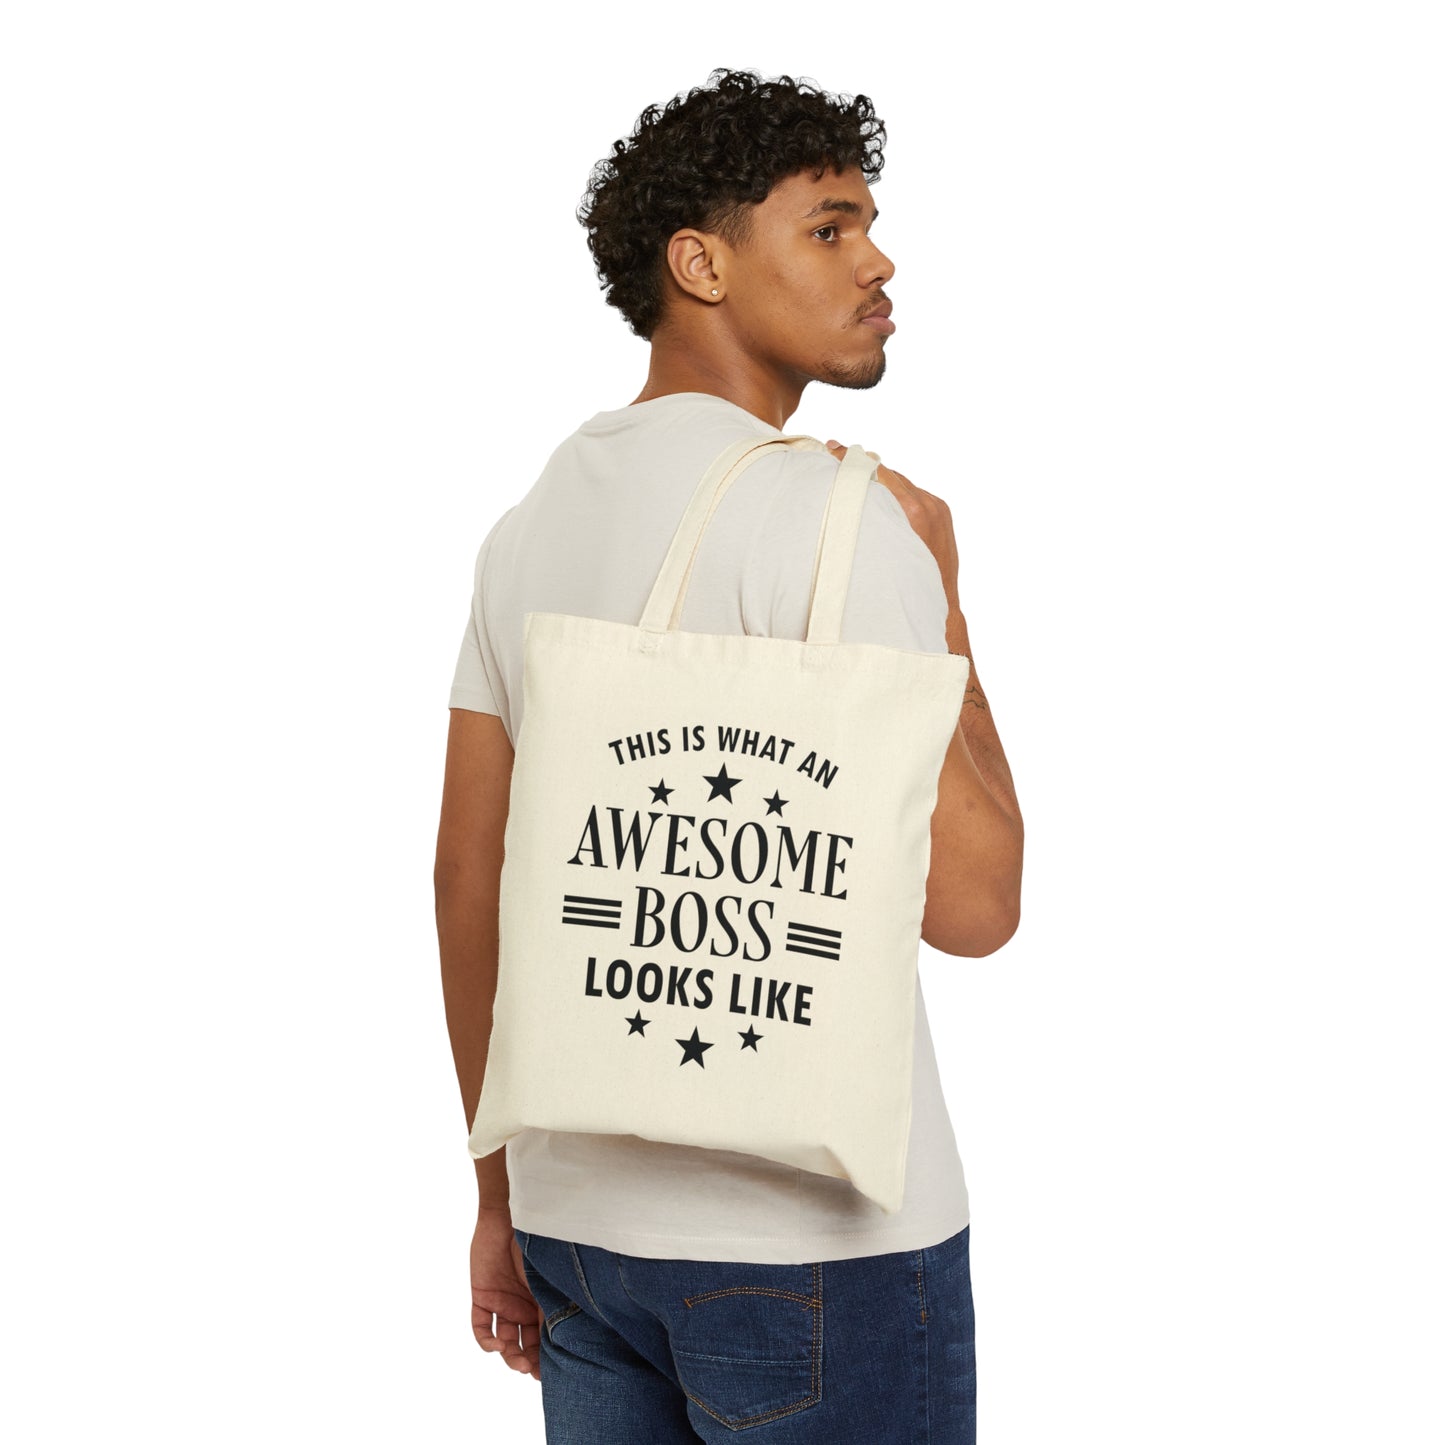 Awesome Boss Funny Slogan Sarcastic Quotes Canvas Shopping Cotton Tote Bag